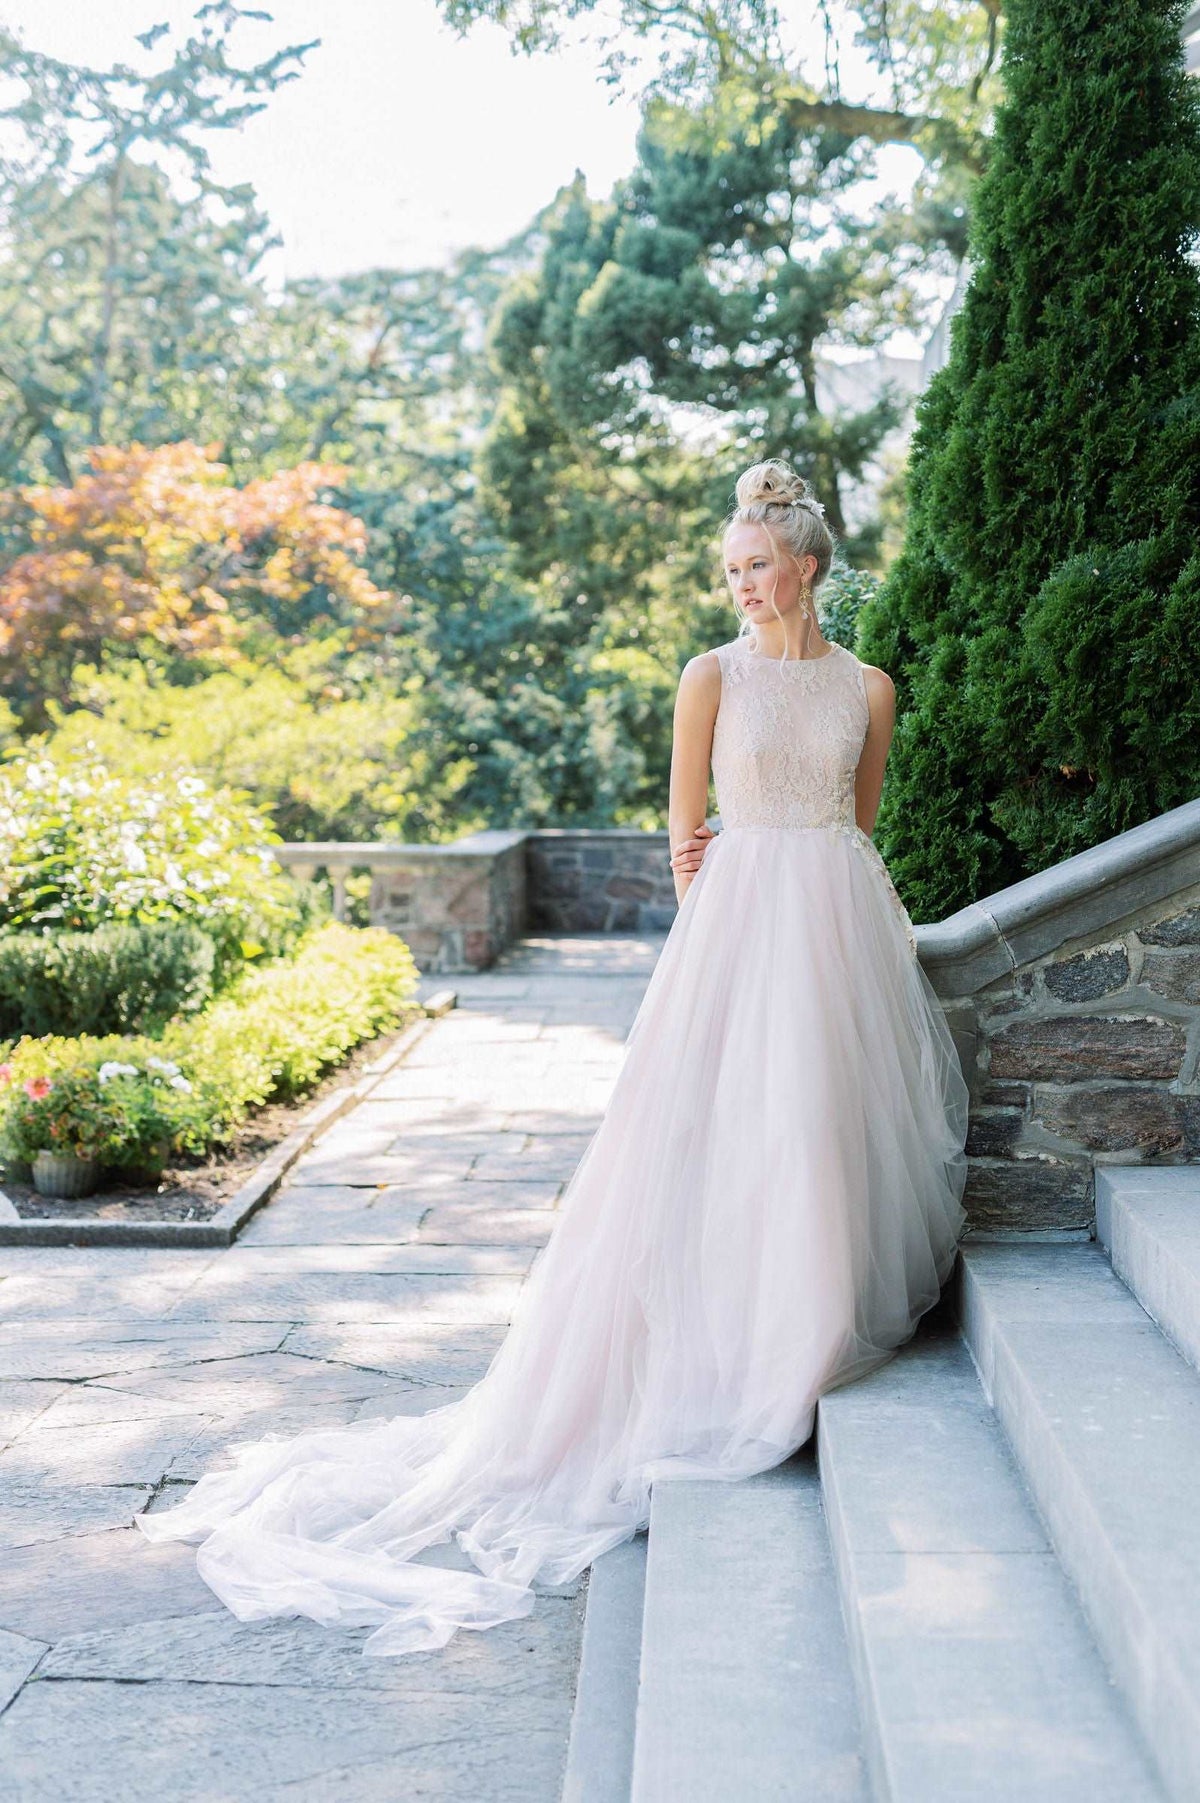 Whimsical modern fairy tale wedding dress by Catherine Langlois.